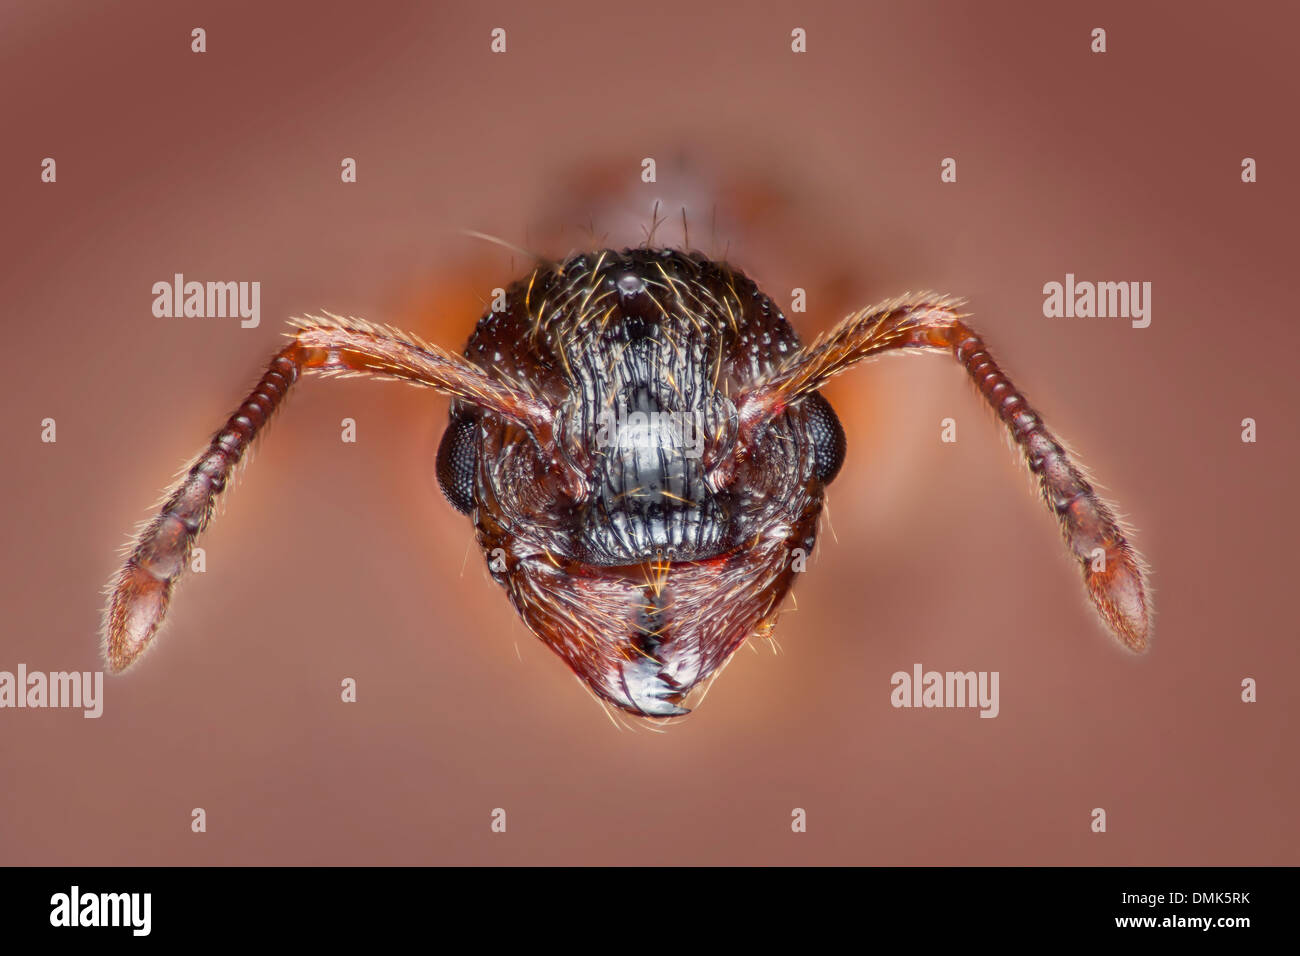 Black garden ant, Lasius niger, high macro portrait showing mouth parts and antennae Stock Photo